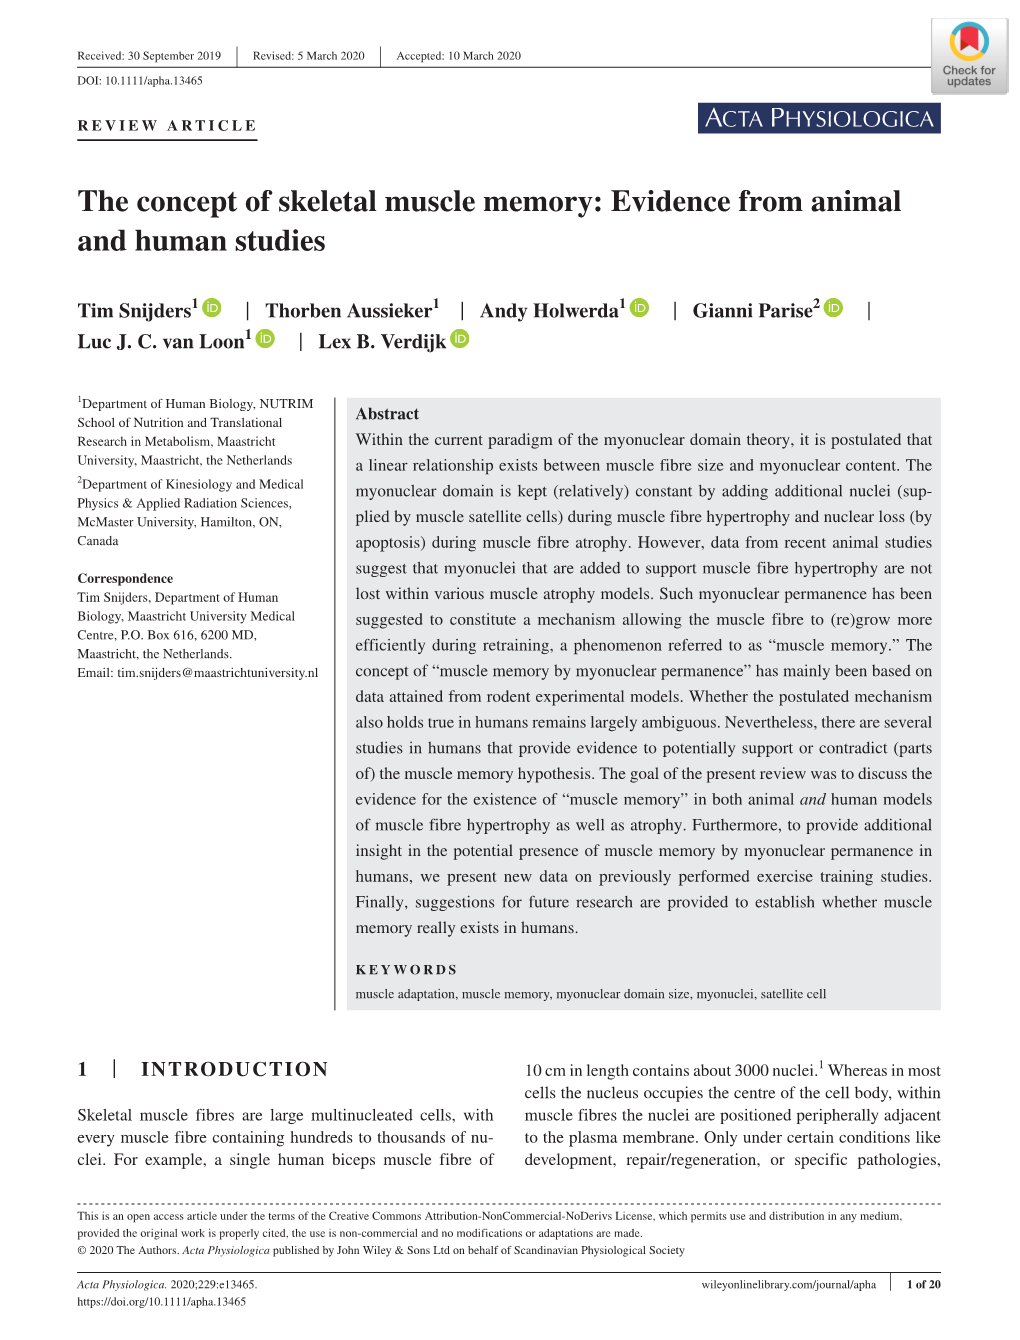 The Concept of Skeletal Muscle Memory: Evidence from Animal and Human Studies